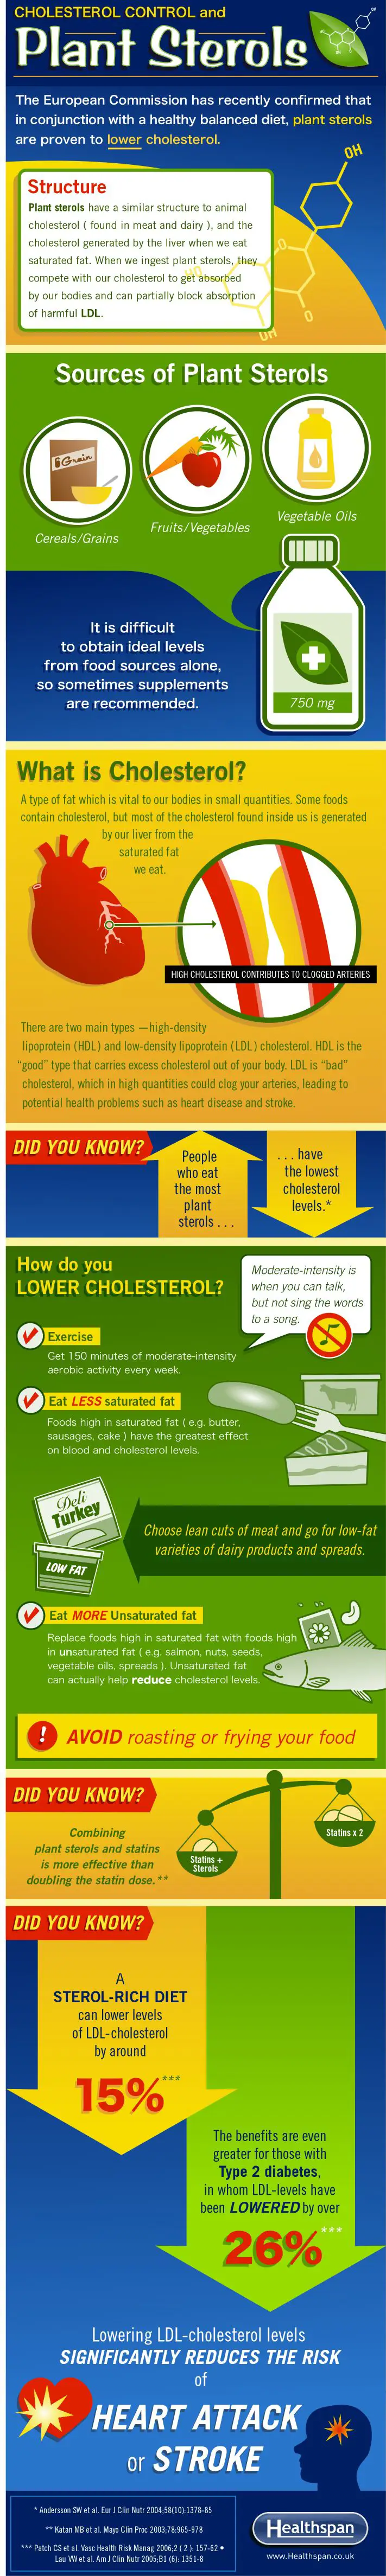 Lifestyle changes for managing high cholesterol